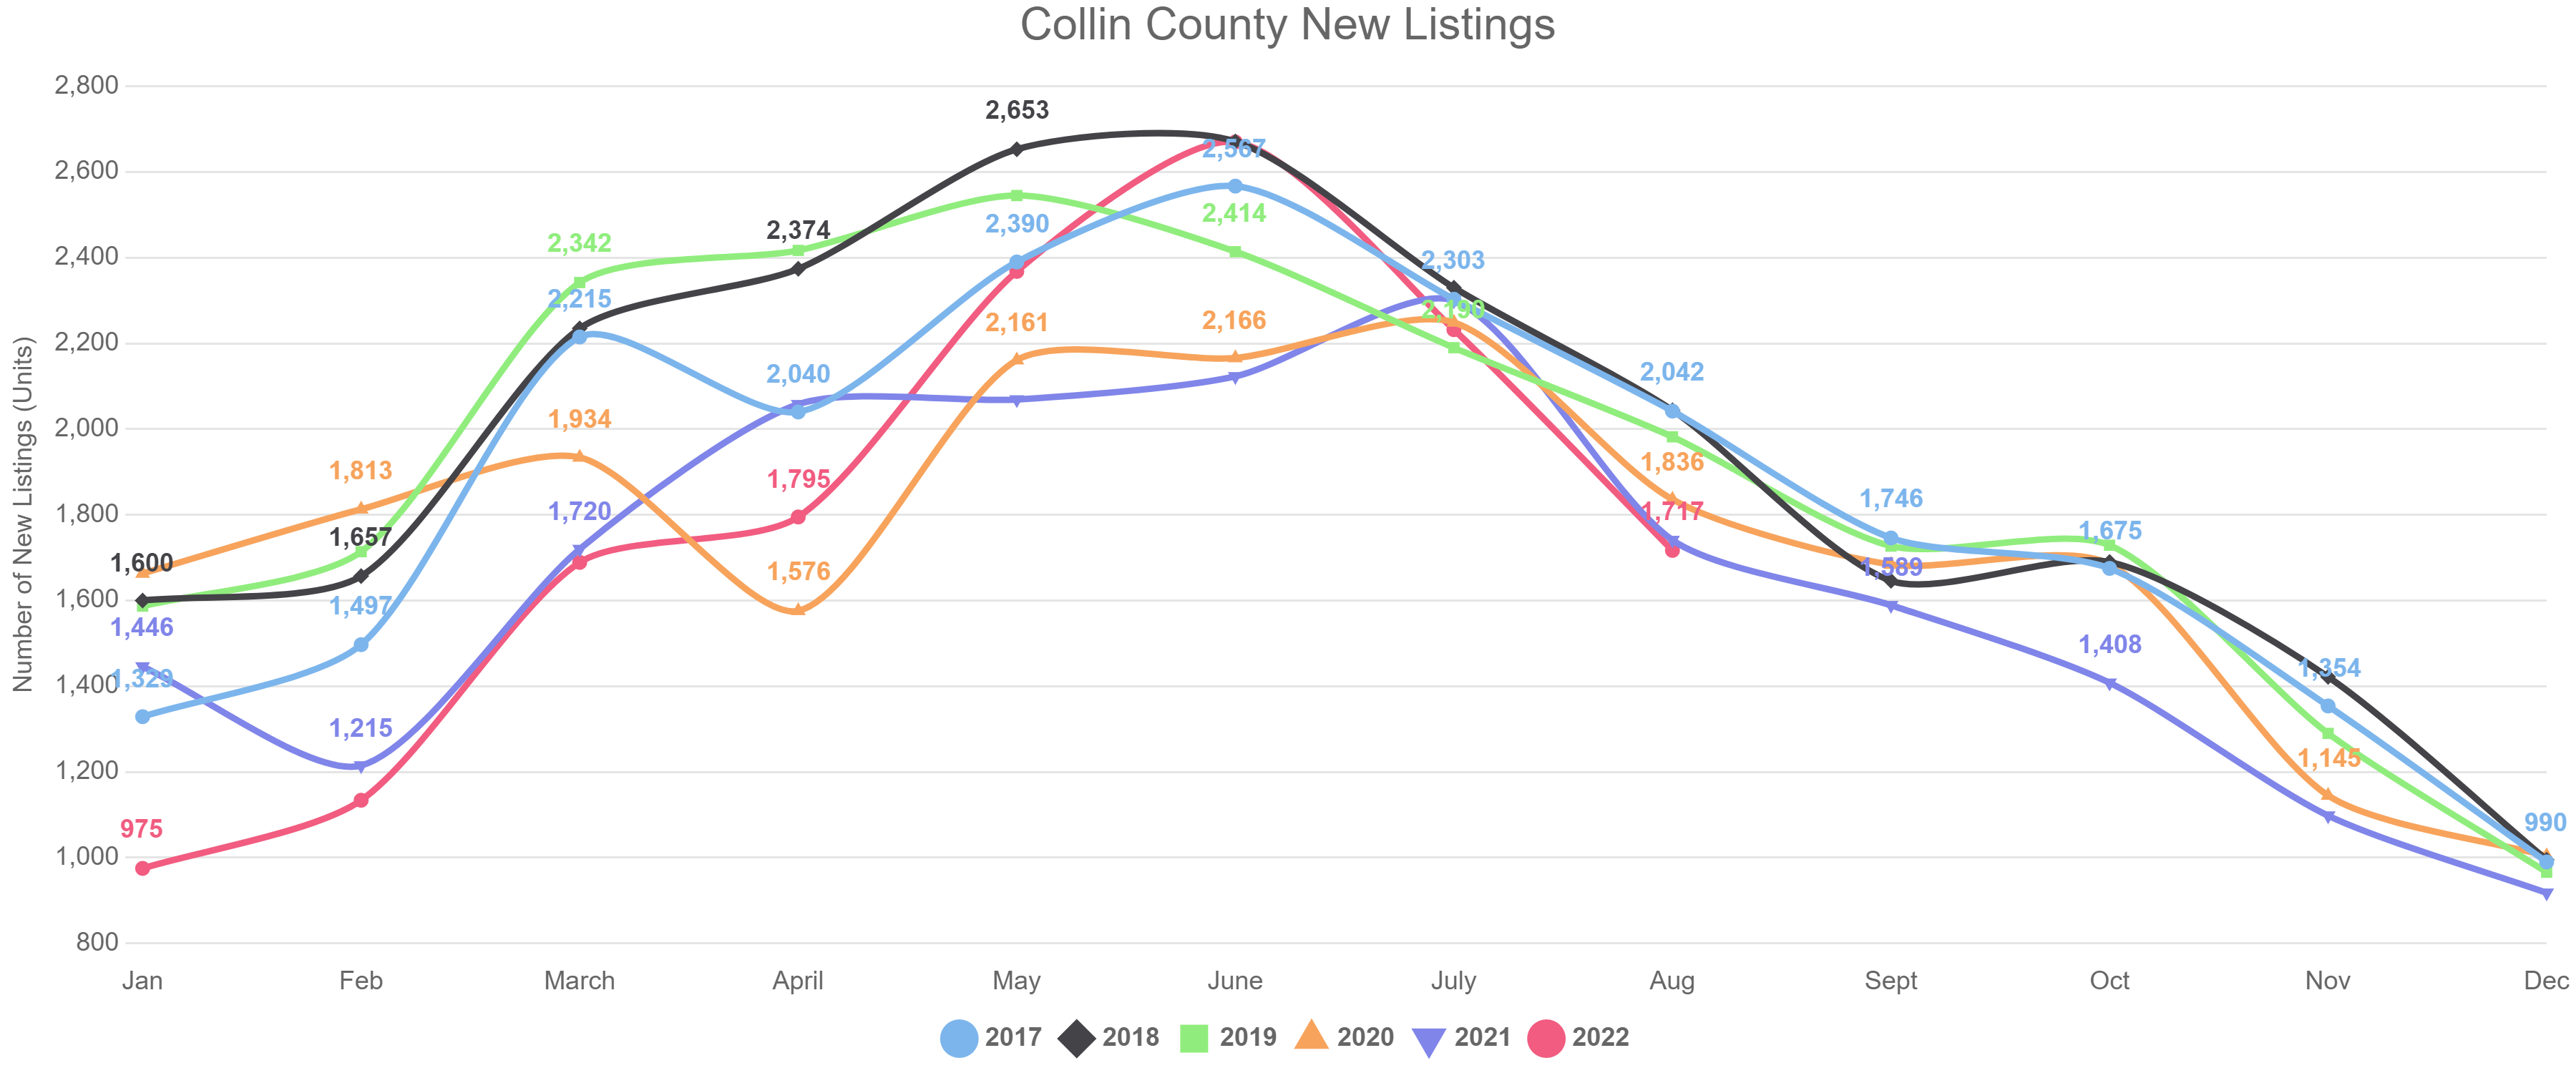 Collin County New Listings